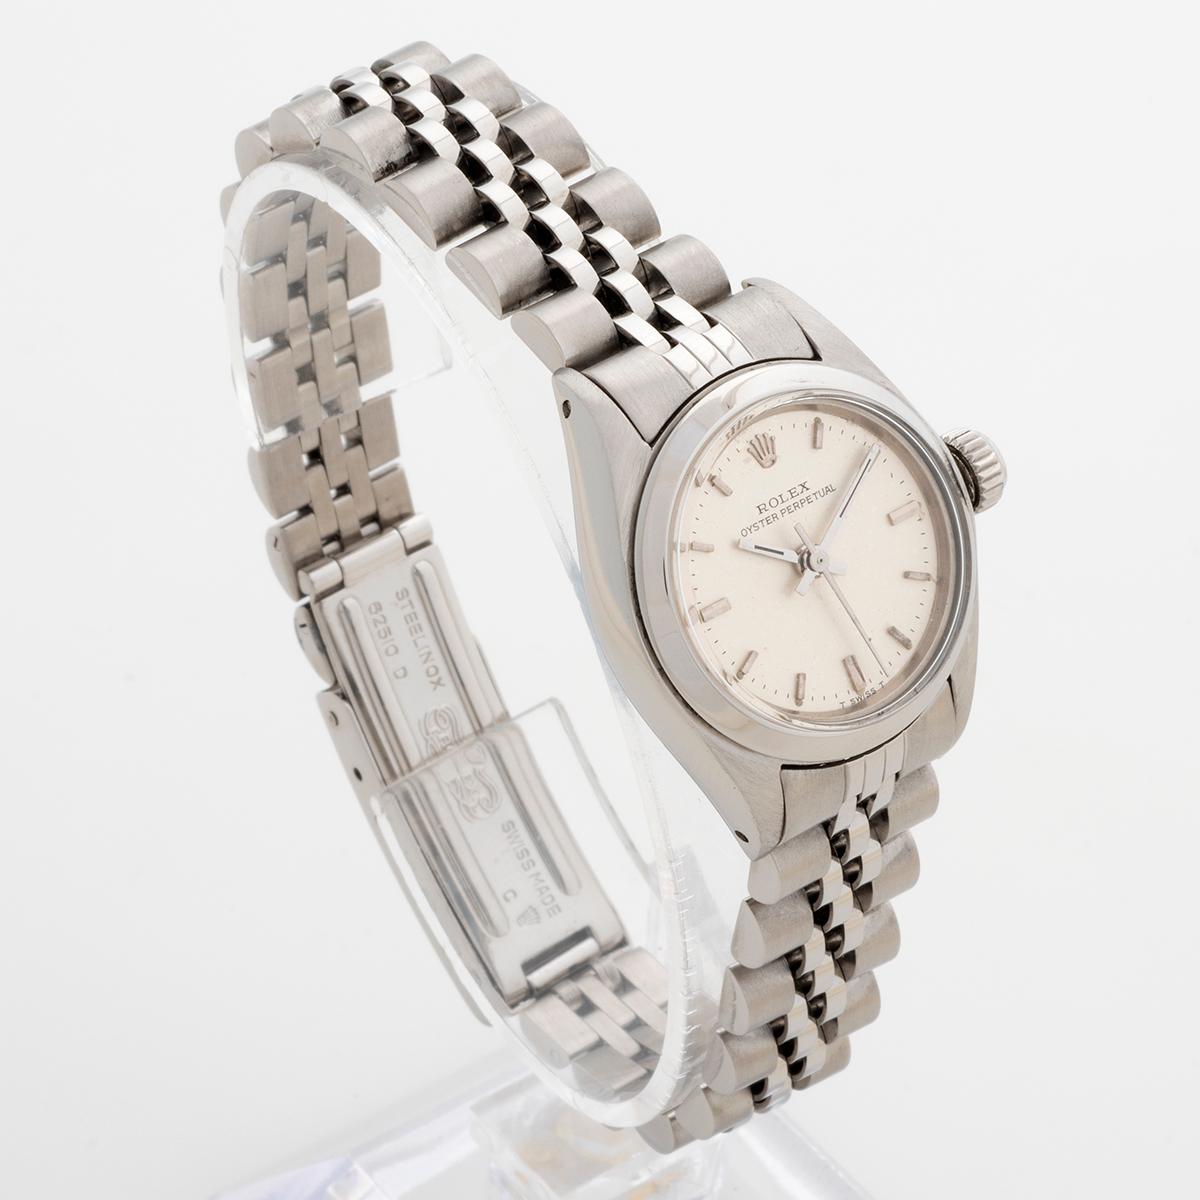 Our vintage Rolex Lady Oyster Perpetual features a stainless steel case, classical jubilee bracelet and lightly patinated white dial. Presented in excellent condition given its age, this is a superb and usable ladies Rolex, with instant recognition